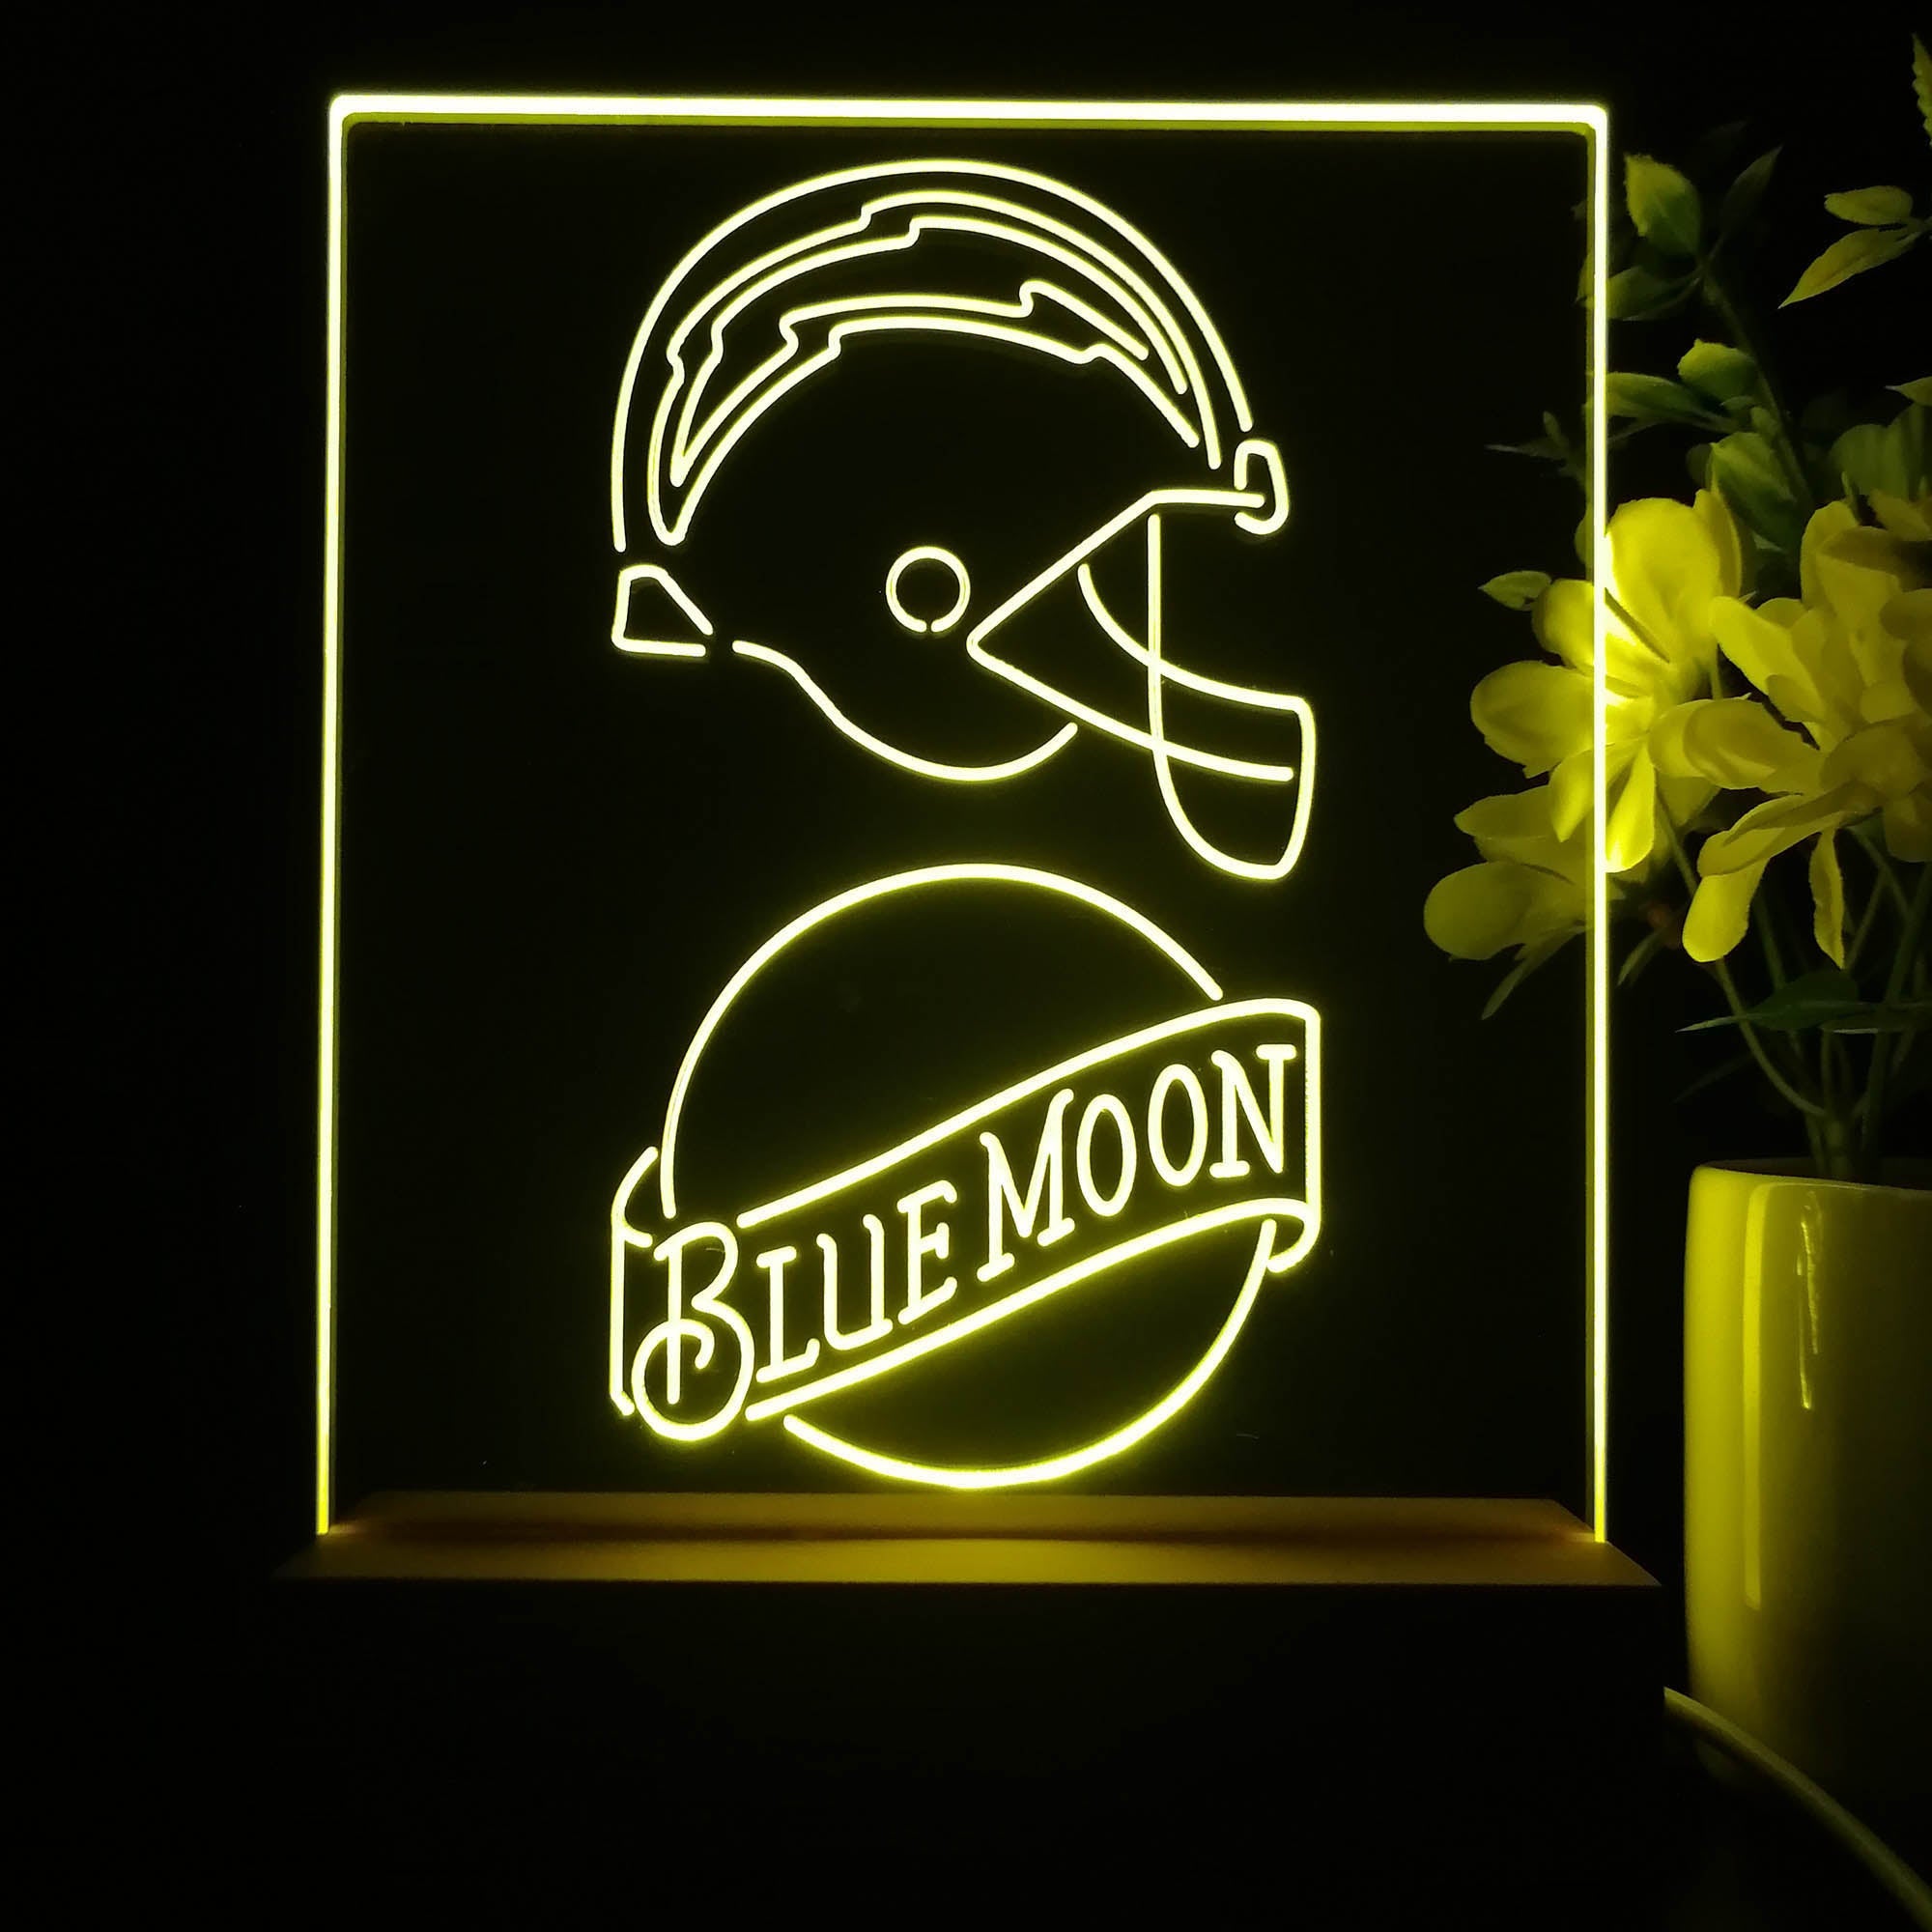 Los Angeles Chargers Blue Moon Neon Sign Pub Bar Lamp